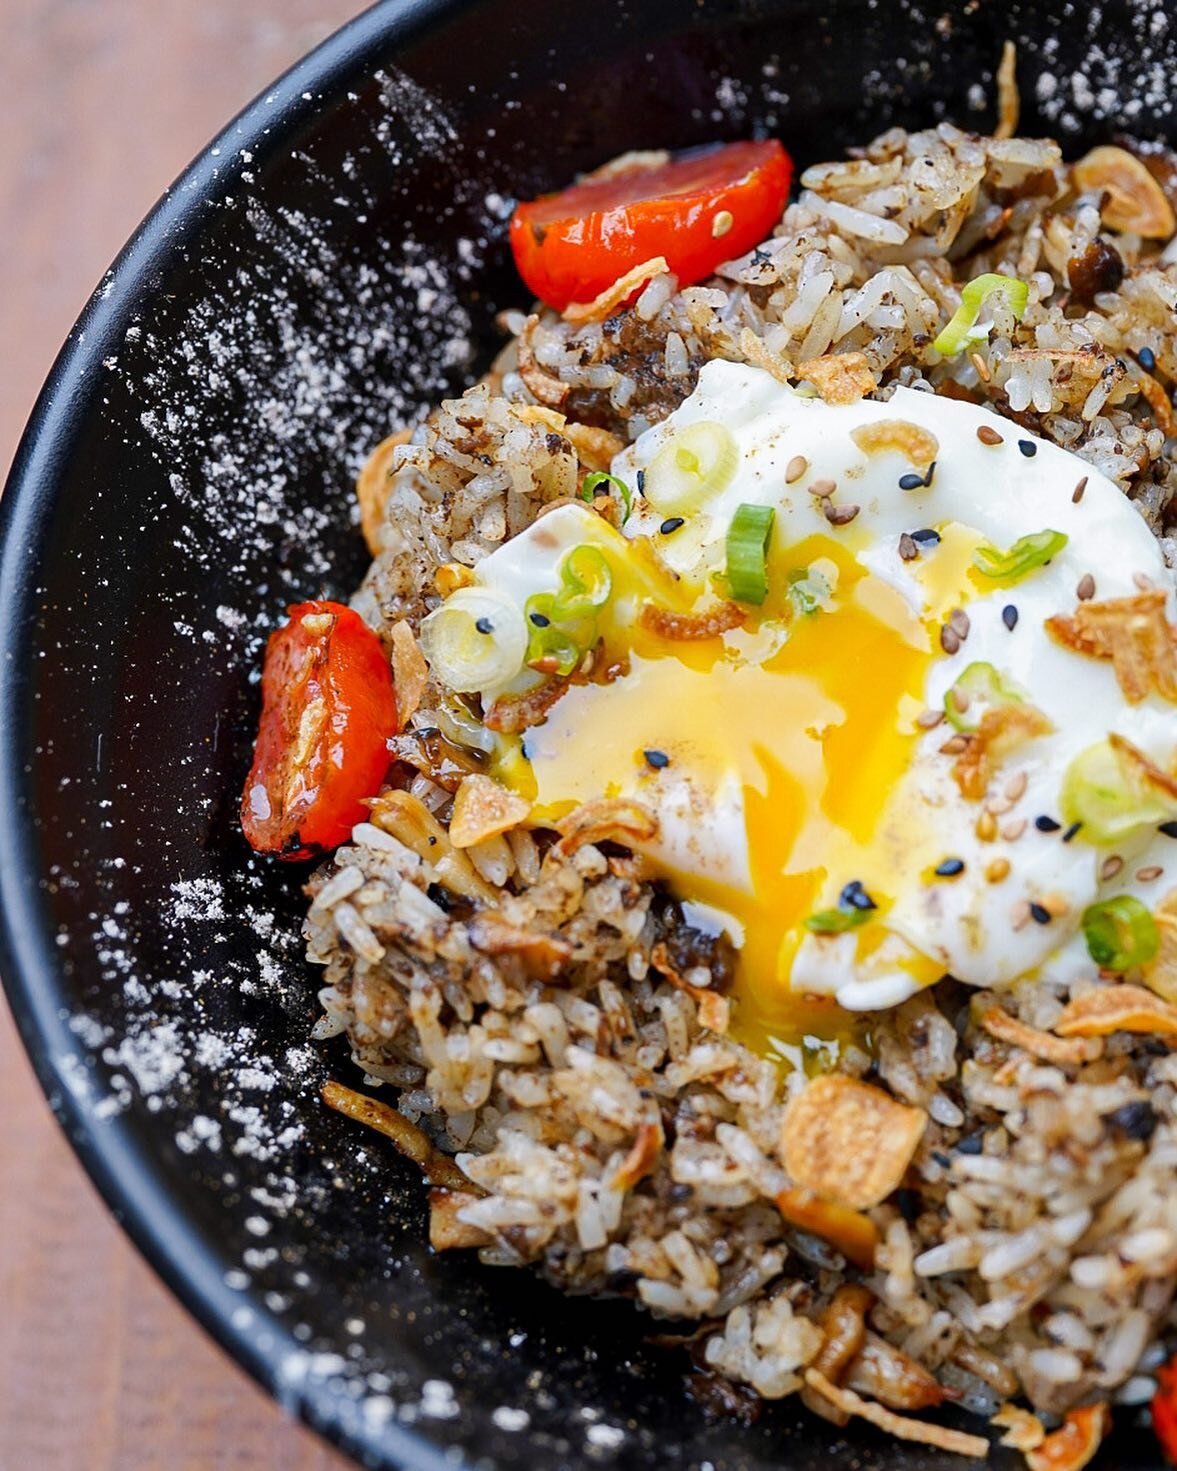 Who&rsquo;s craving truffle fried rice??? 😌